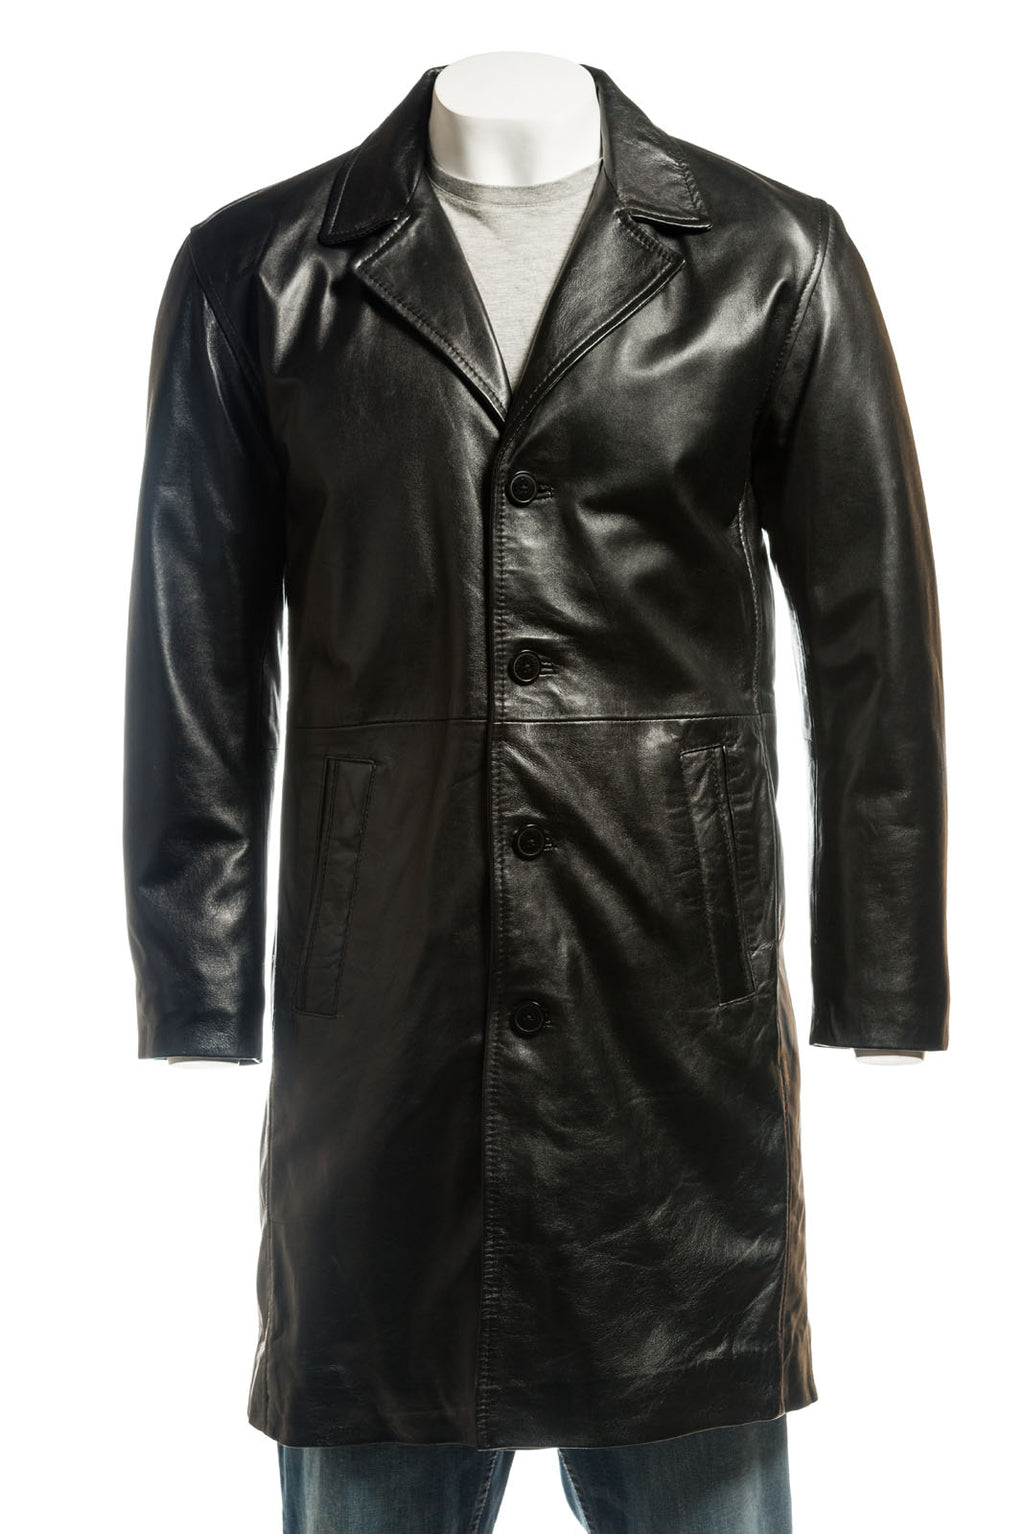 Men's 3/4 Trench Style Single Breasted Leather Coat: Lucio